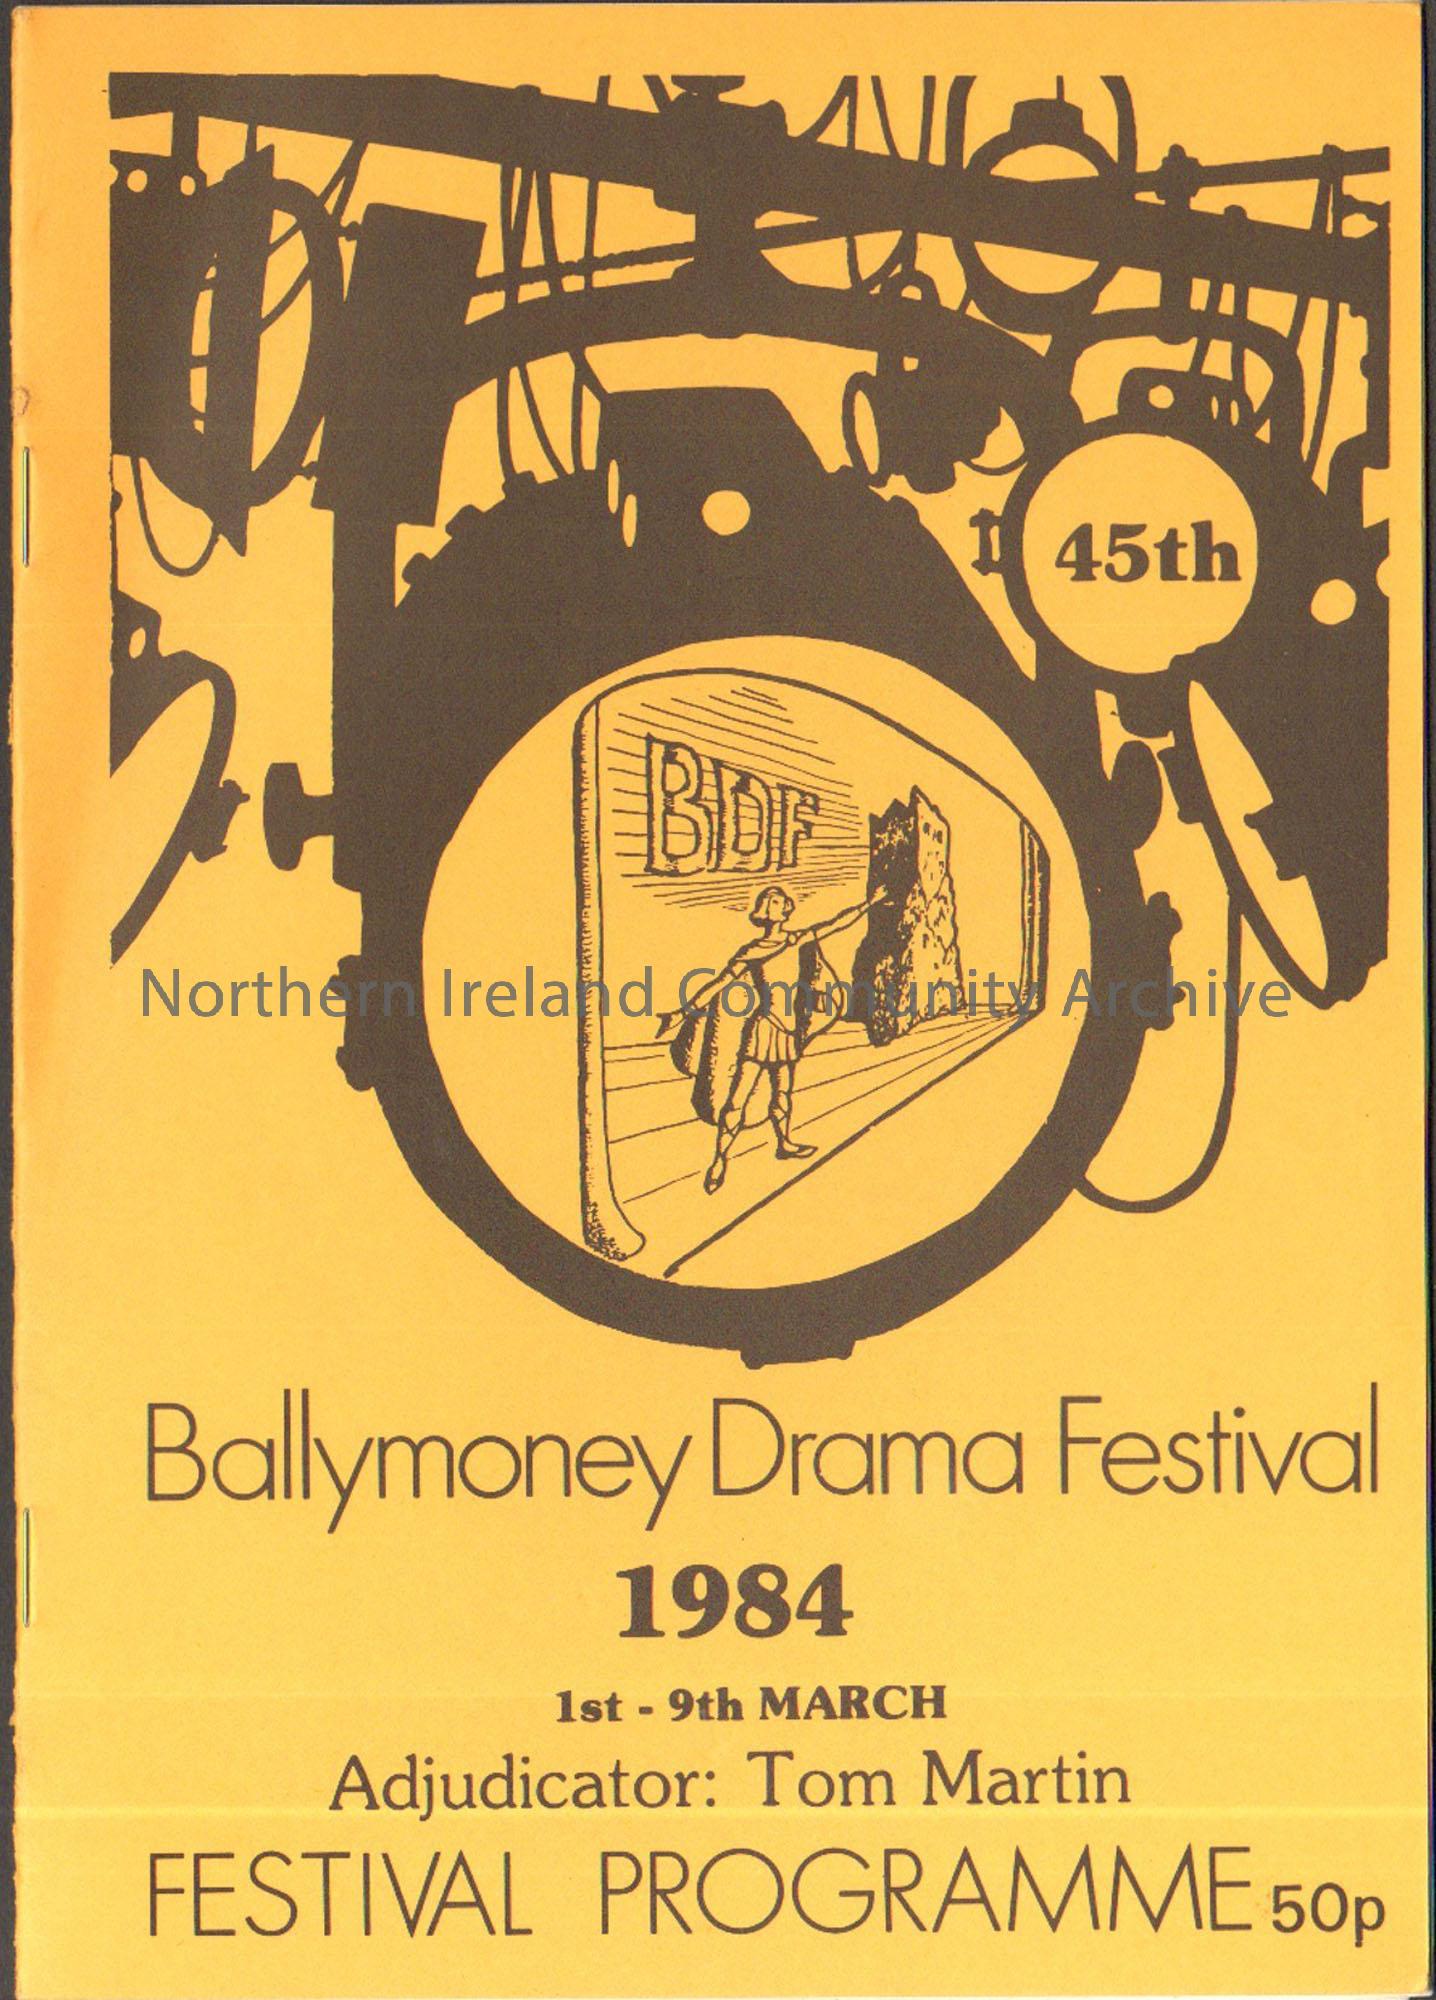 Ballymoney Drama Festival Programme 1984. Orange cover with black writing with an image of someone on a stage in front of a tower inside a black stage…